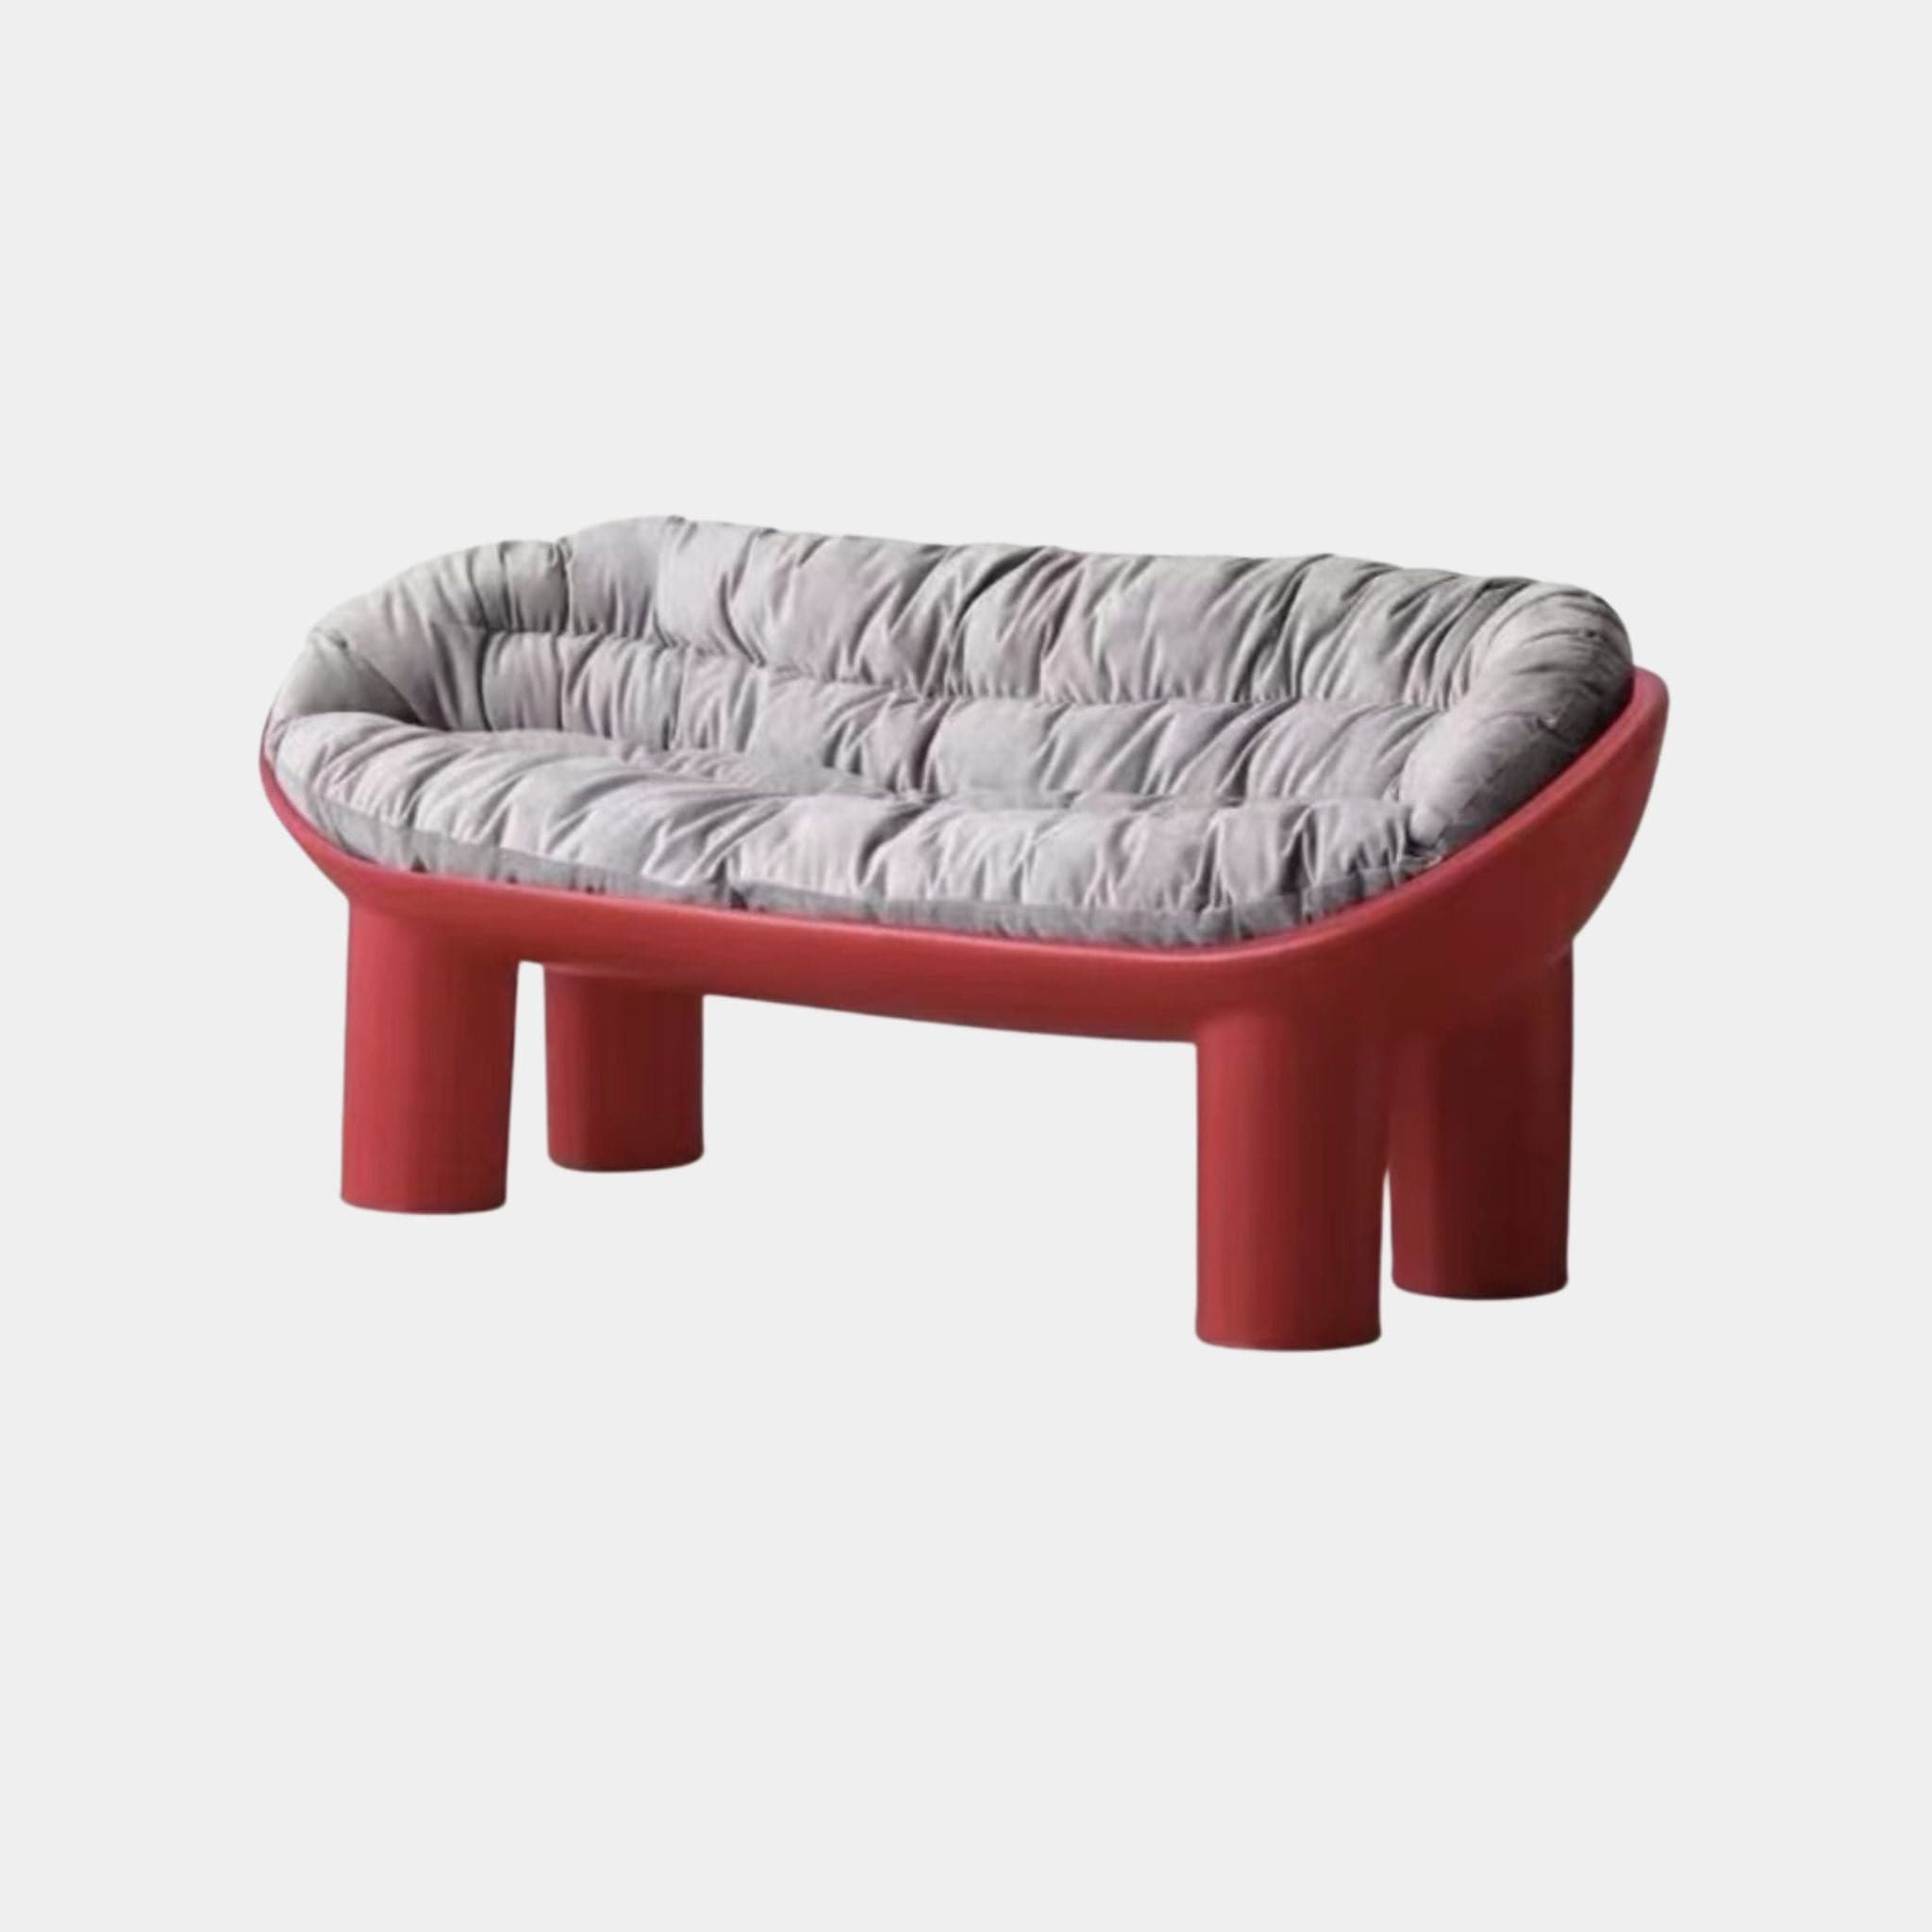 roly poly bench replica